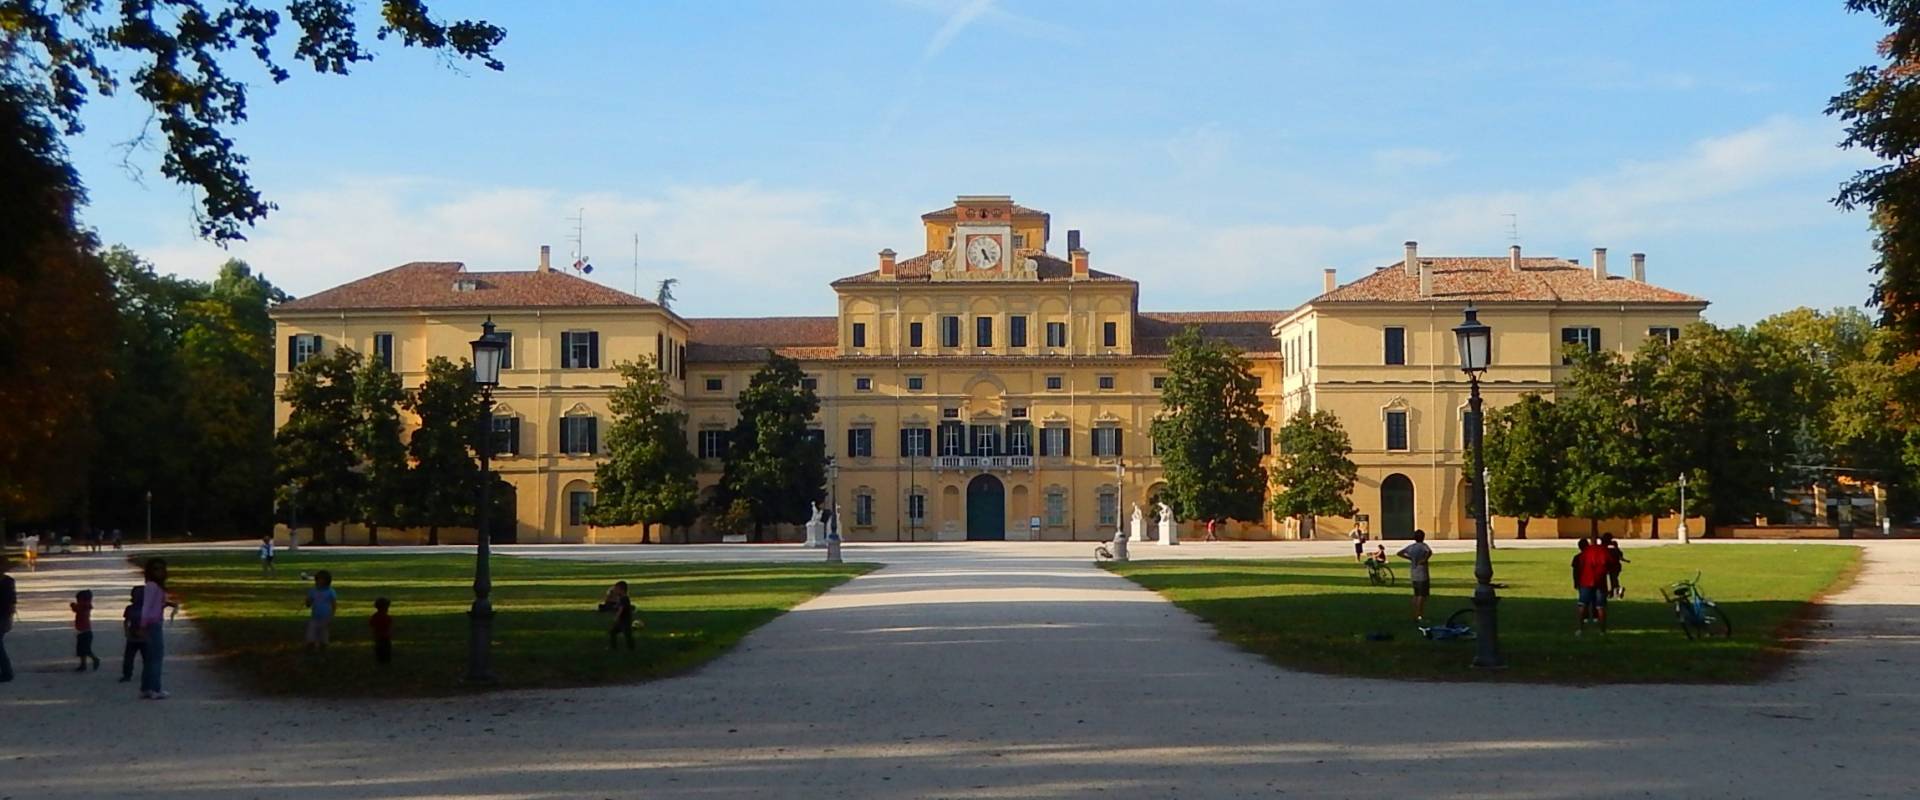 Palazzo Ducale in settembre photo by Luca Fornasari